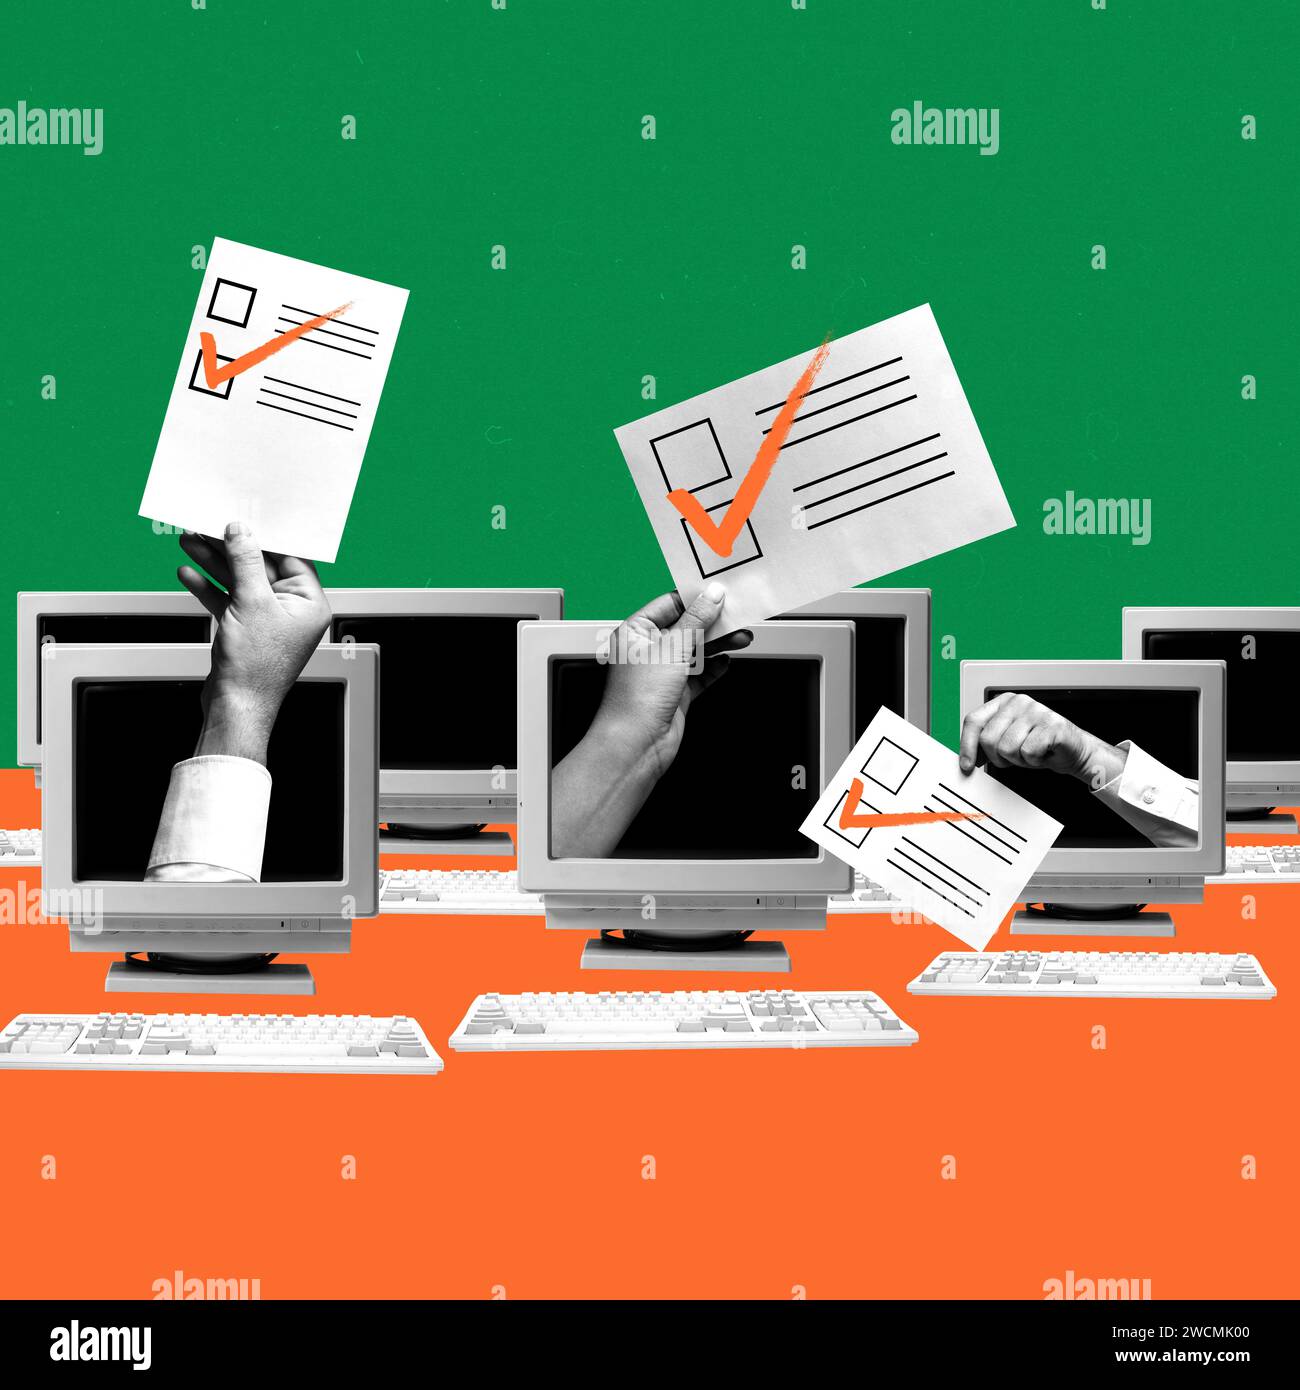 Online voting system and analytics. Human hands with ballot papers with checkmark appearing from computer monitor. Contemporary art collage Stock Photo